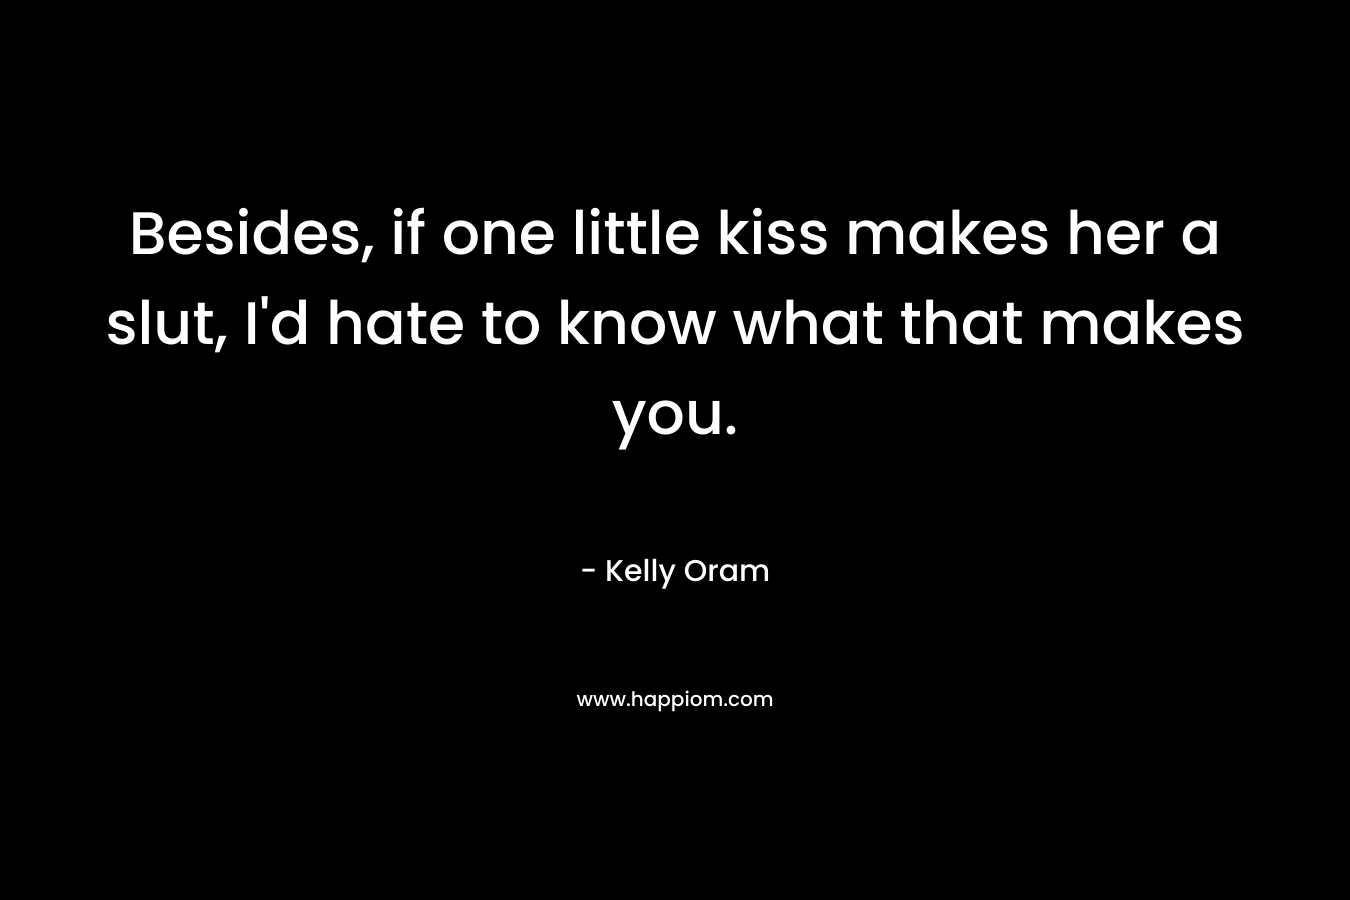 Besides, if one little kiss makes her a slut, I’d hate to know what that makes you. – Kelly Oram